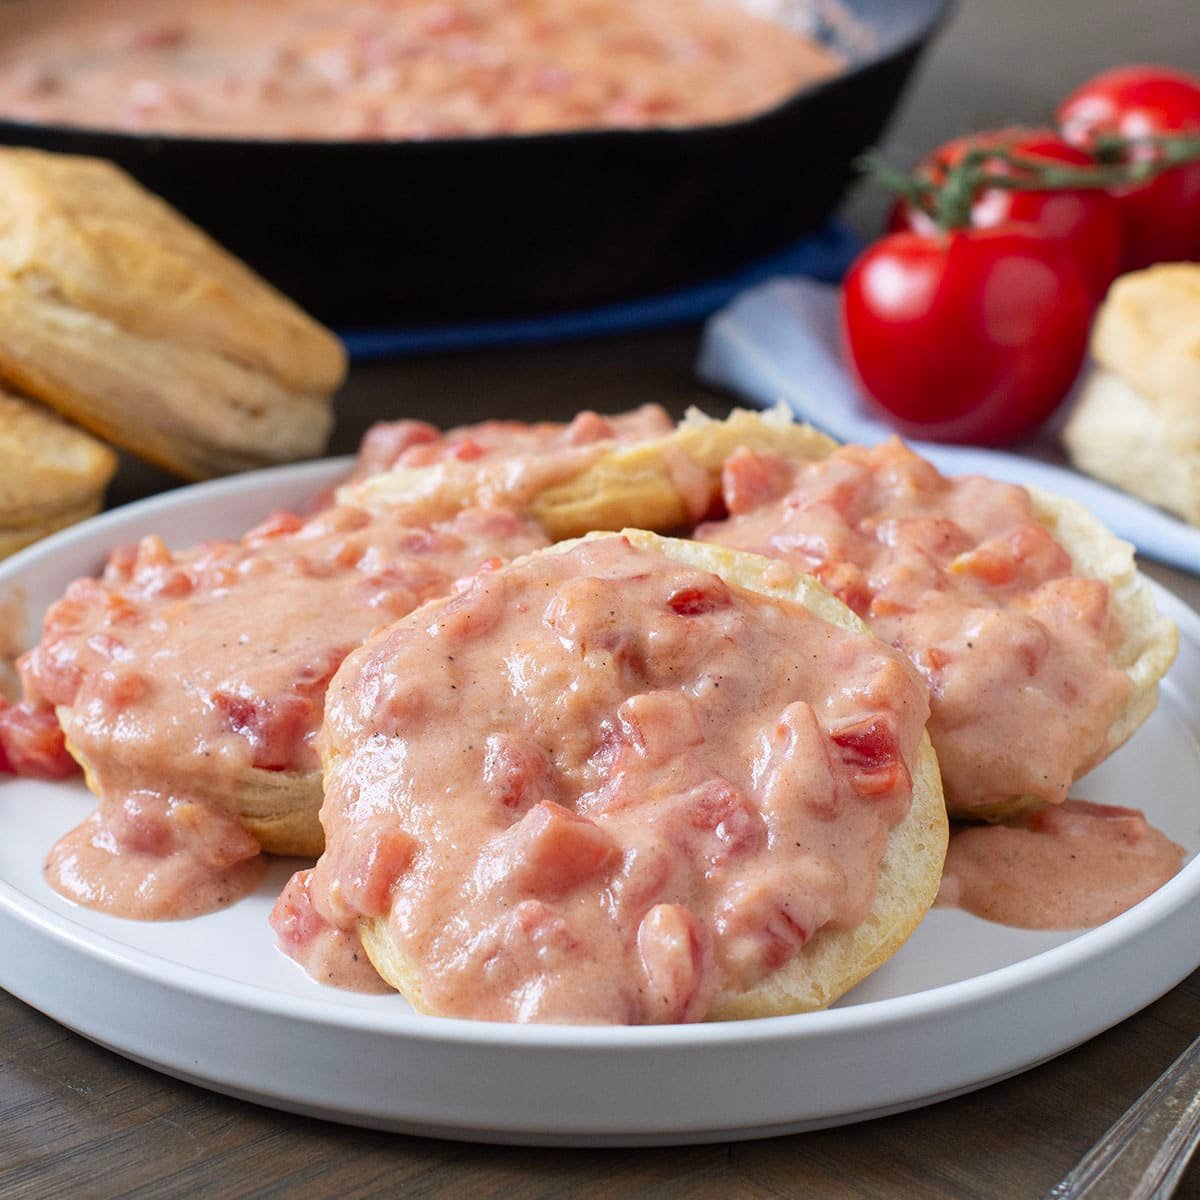 Plate of biscuits with Southern tomato gravy on top.